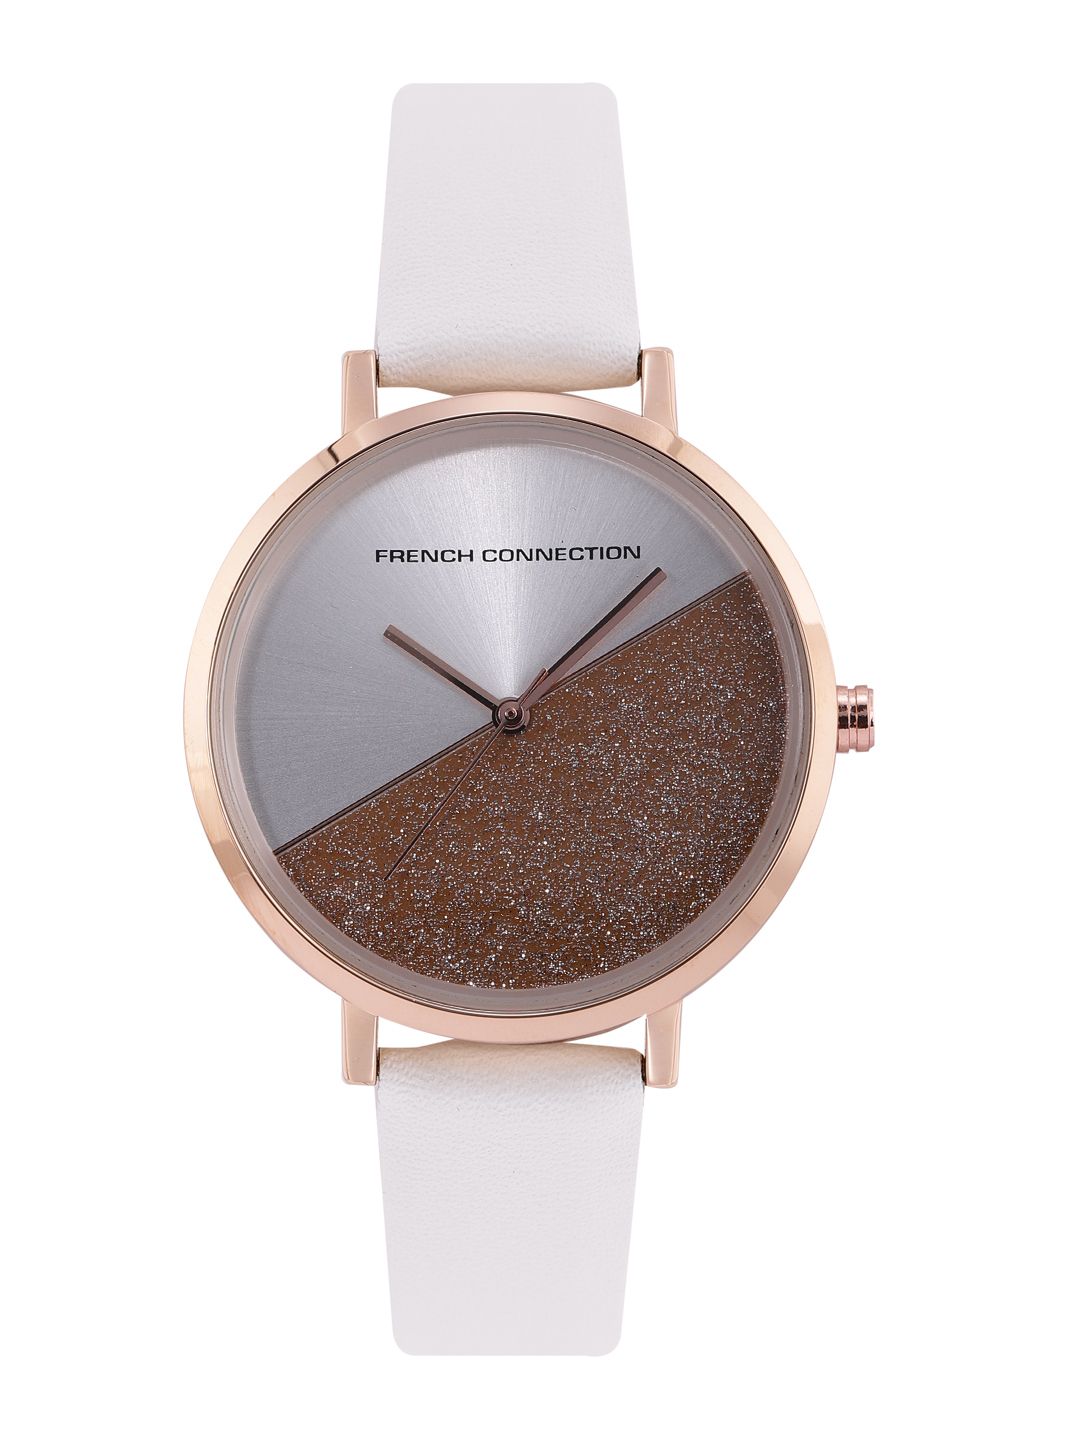 French Connection Women White & Brown Analogue Watch FCN0008B-R Price in India